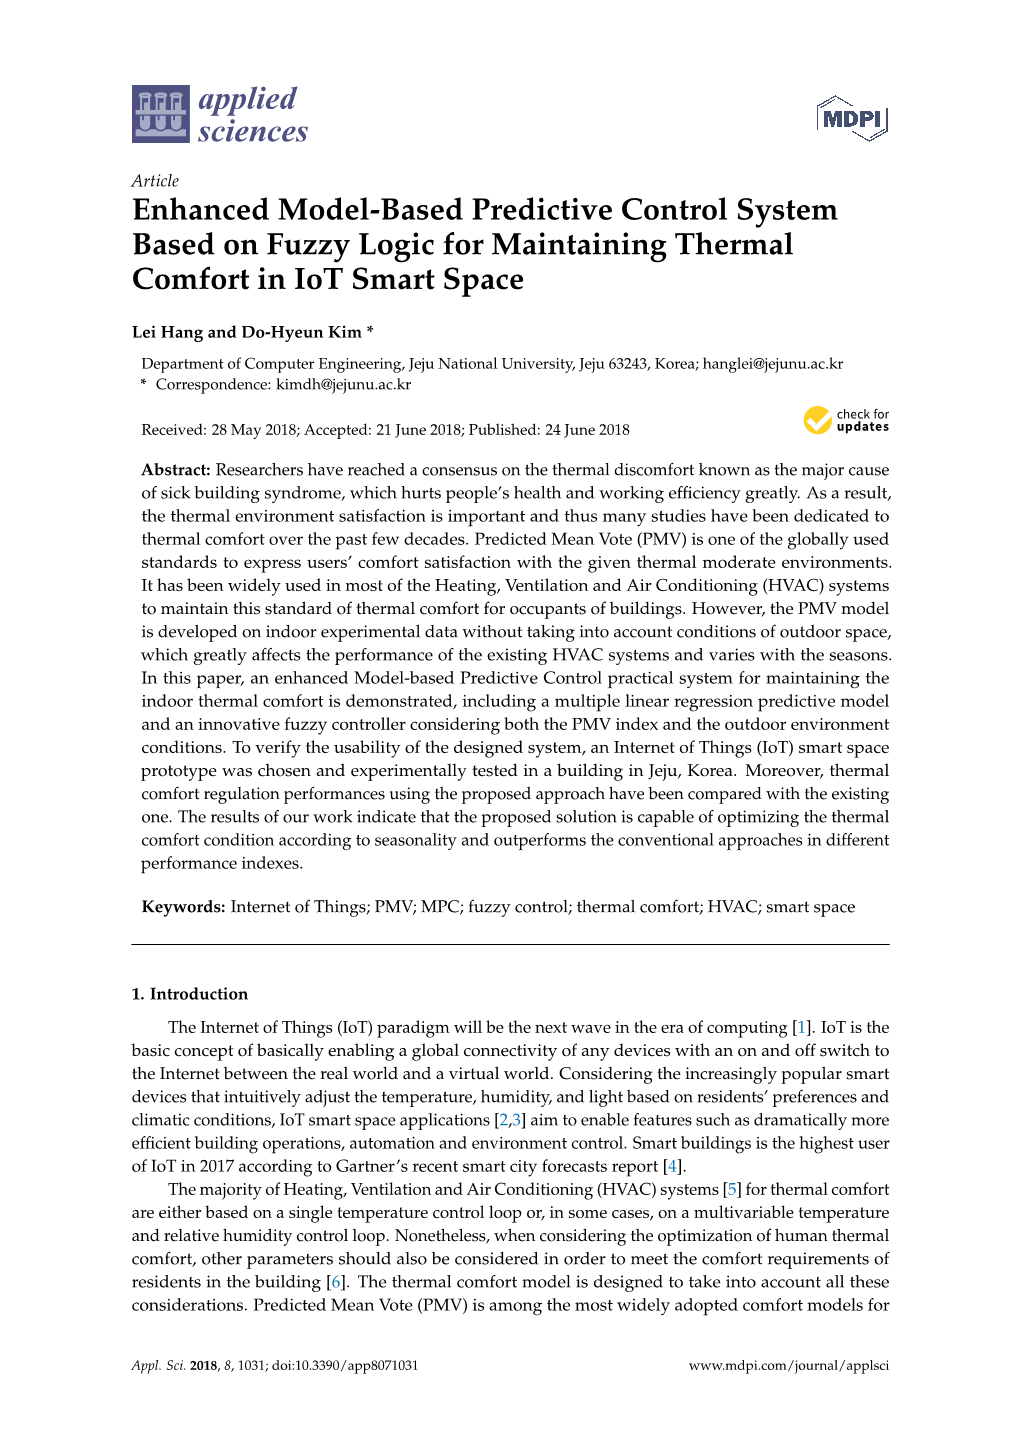 Enhanced Model-Based Predictive Control System Based on Fuzzy Logic for Maintaining Thermal Comfort in Iot Smart Space